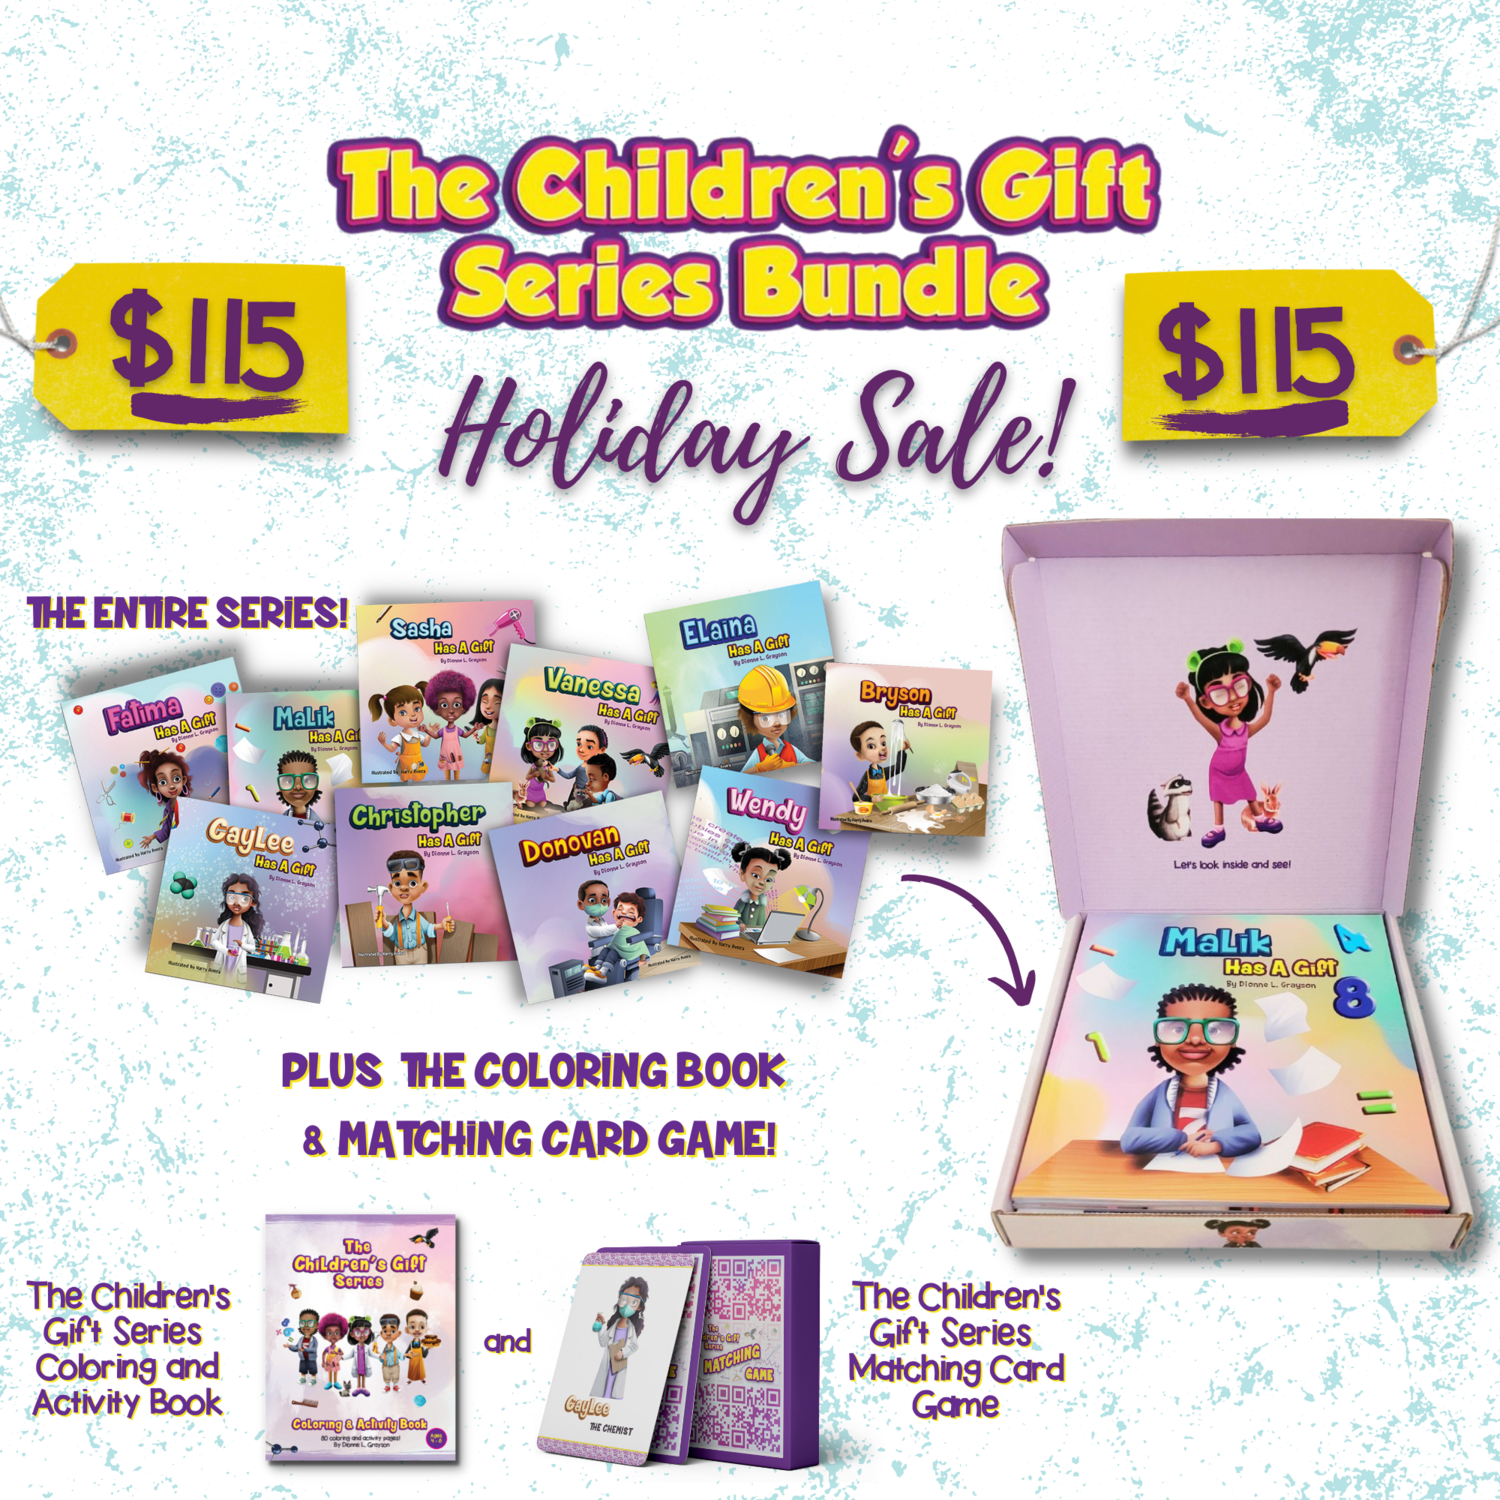 The Children's Gift Series Holiday Bundle